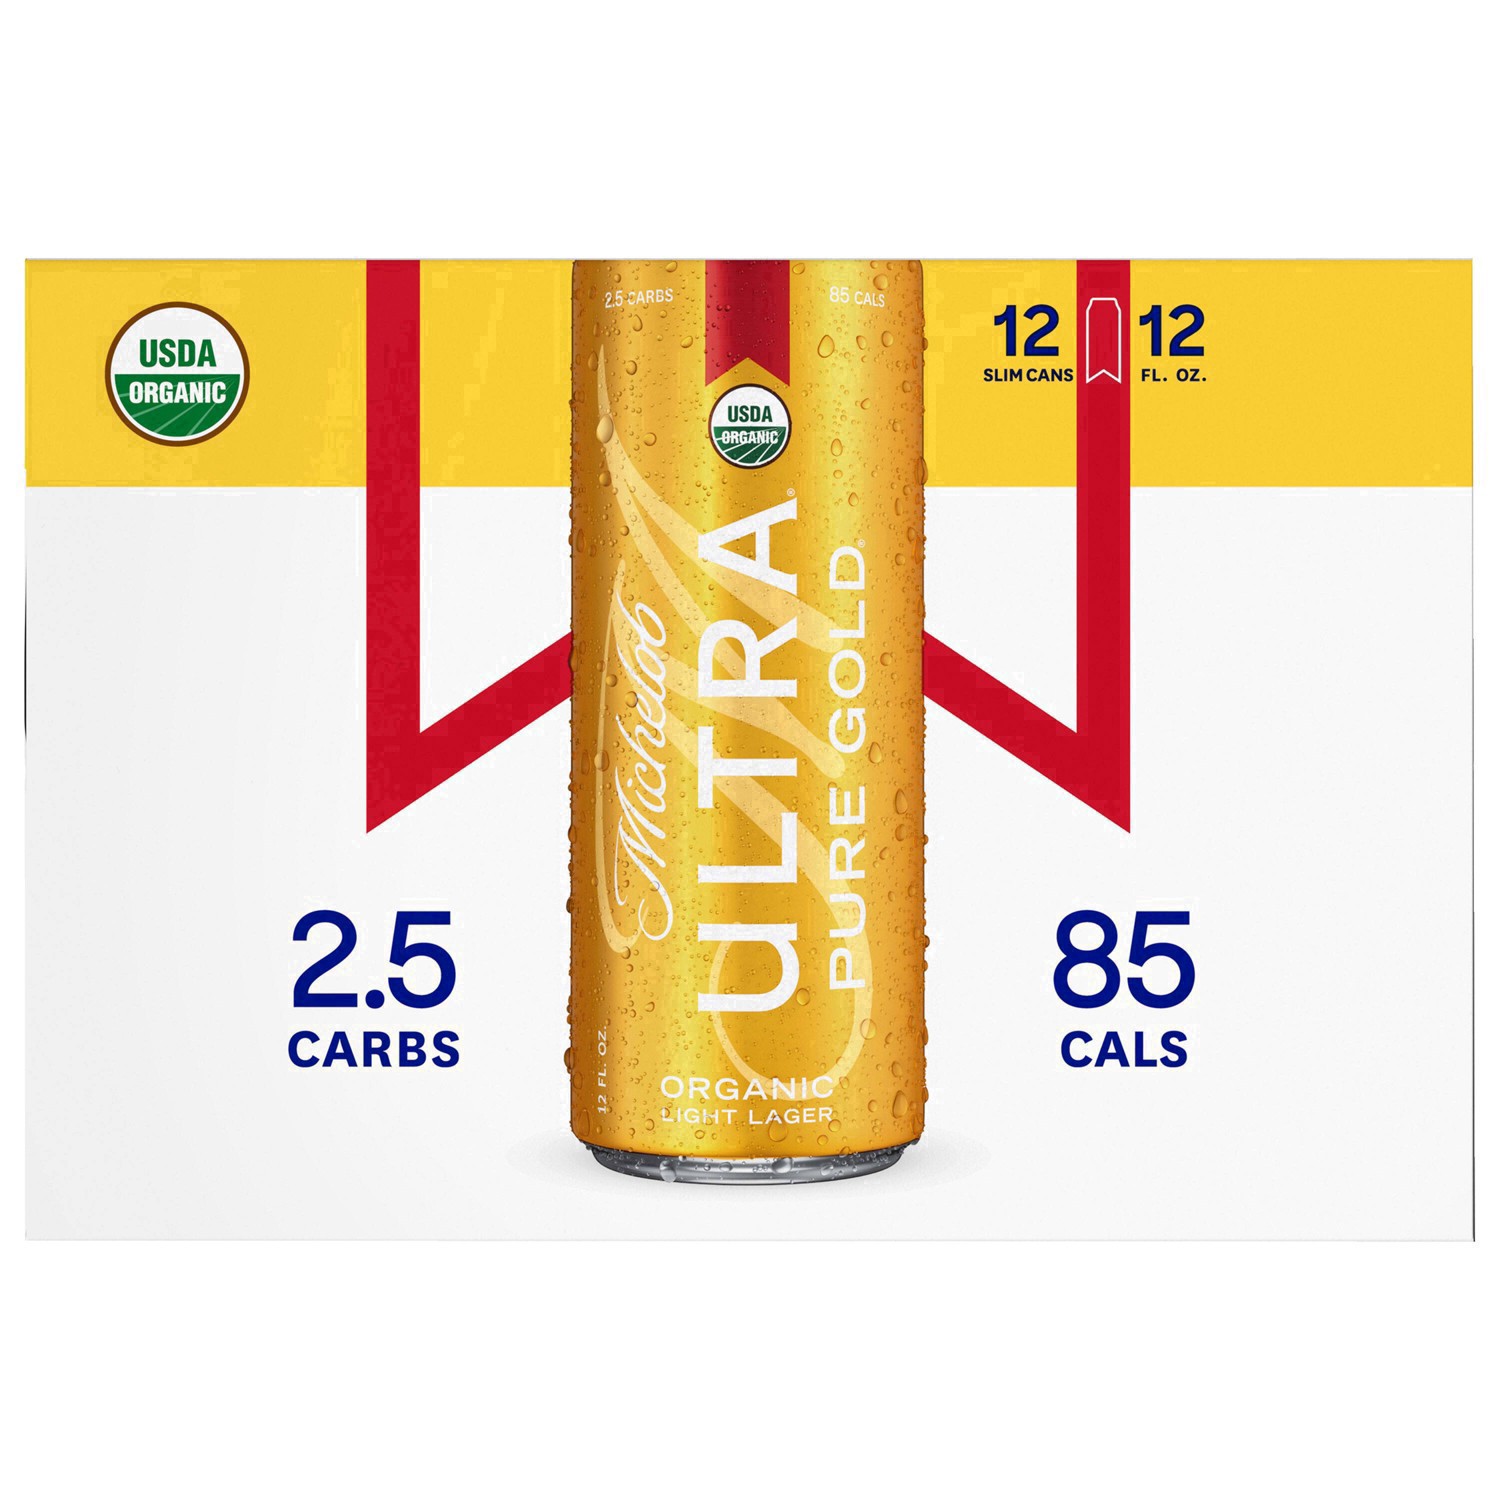 slide 80 of 134, Michelob Ultra Pure Gold Organic Light Lager Beer, 12-12 fl. oz. Cans, 12 ct; 12 oz